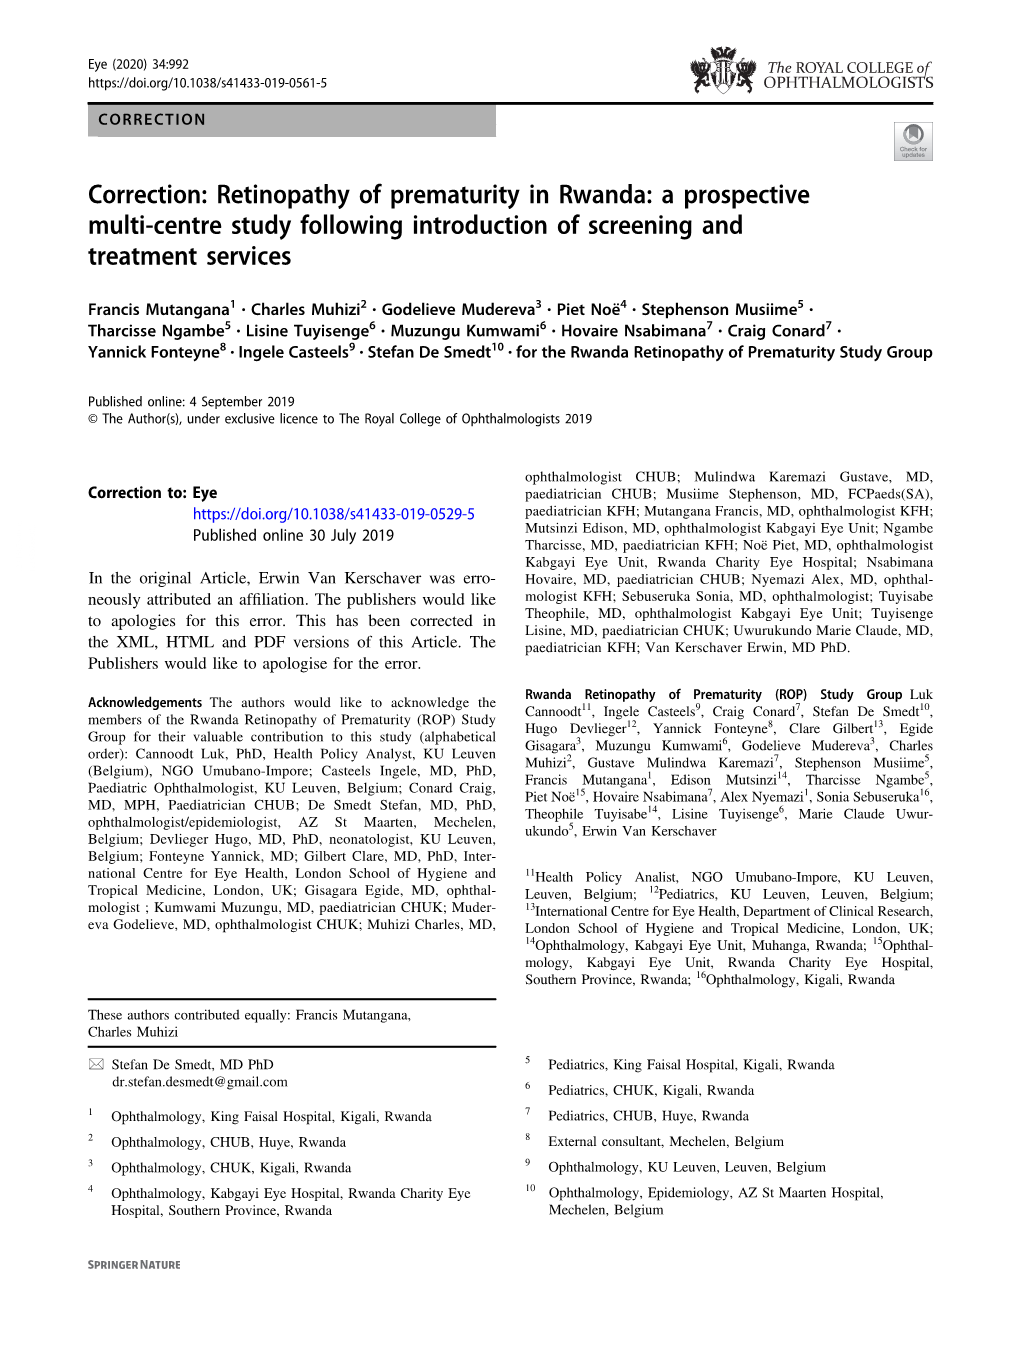 Correction: Retinopathy of Prematurity in Rwanda: a Prospective Multi-Centre Study Following Introduction of Screening and Treatment Services